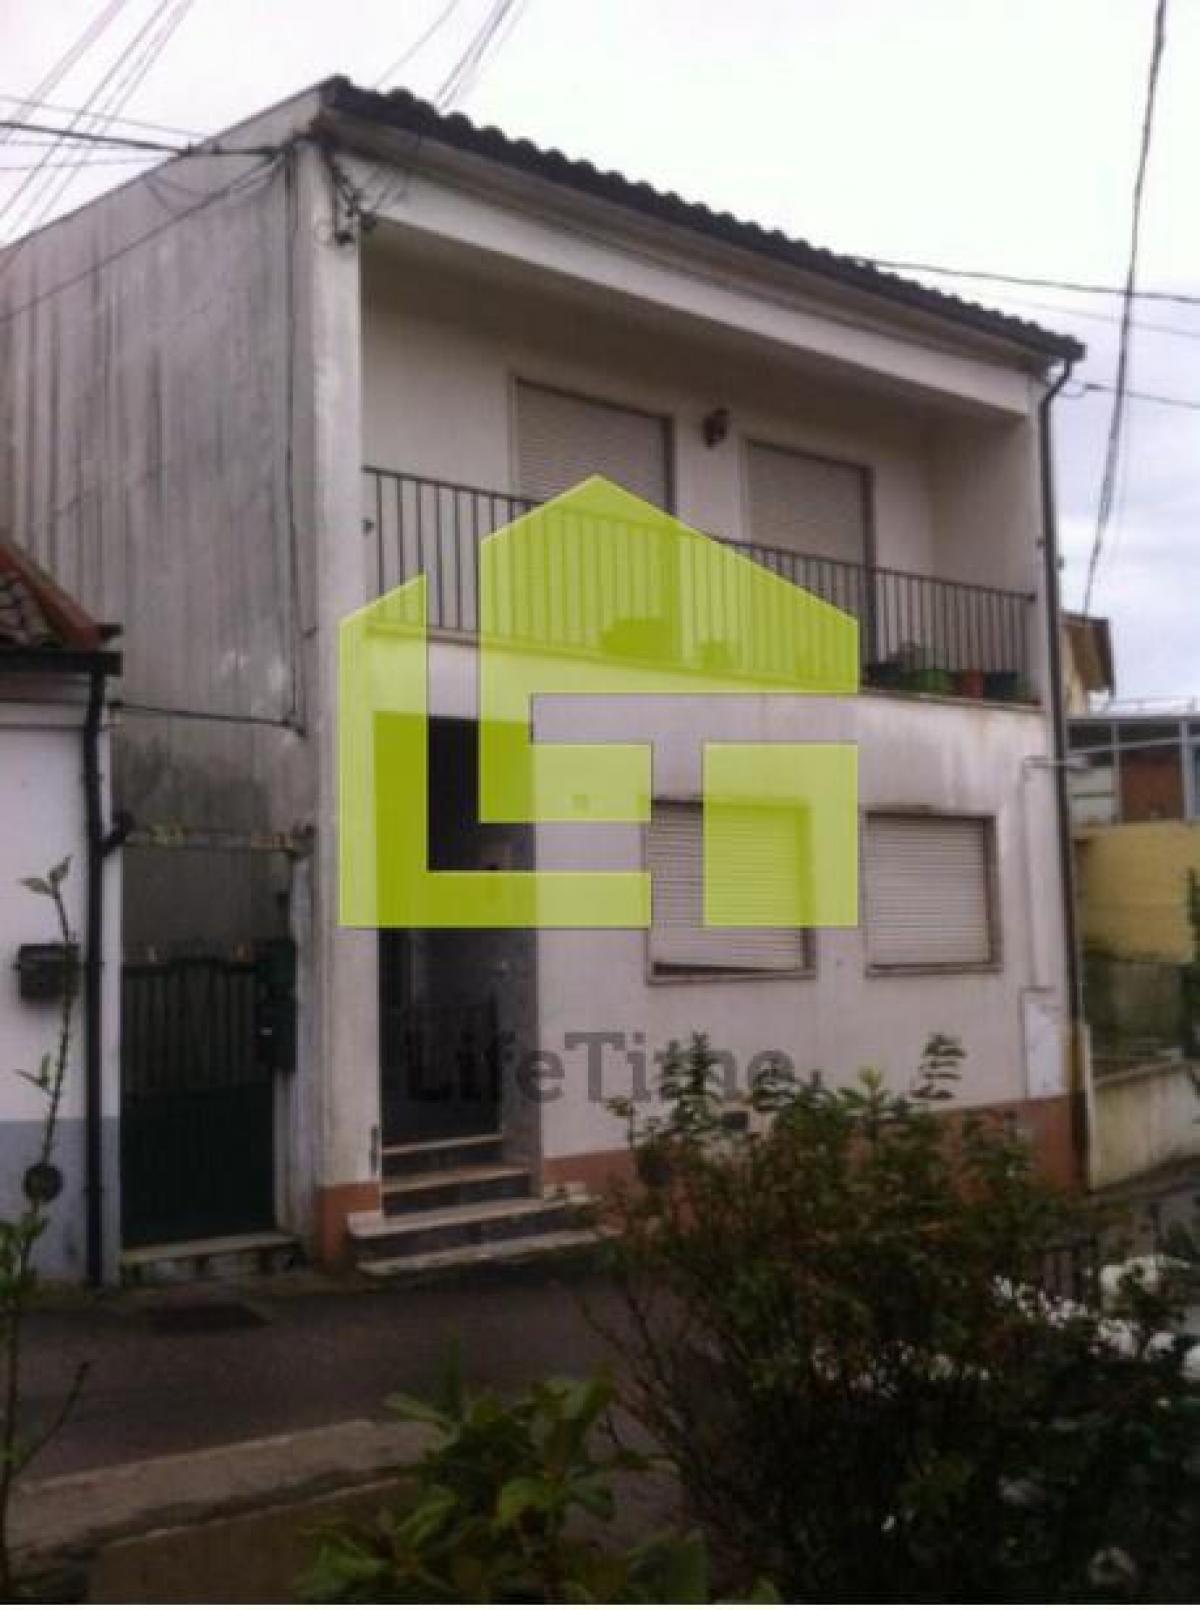 Picture of Home For Sale in Coimbra, Beira, Portugal